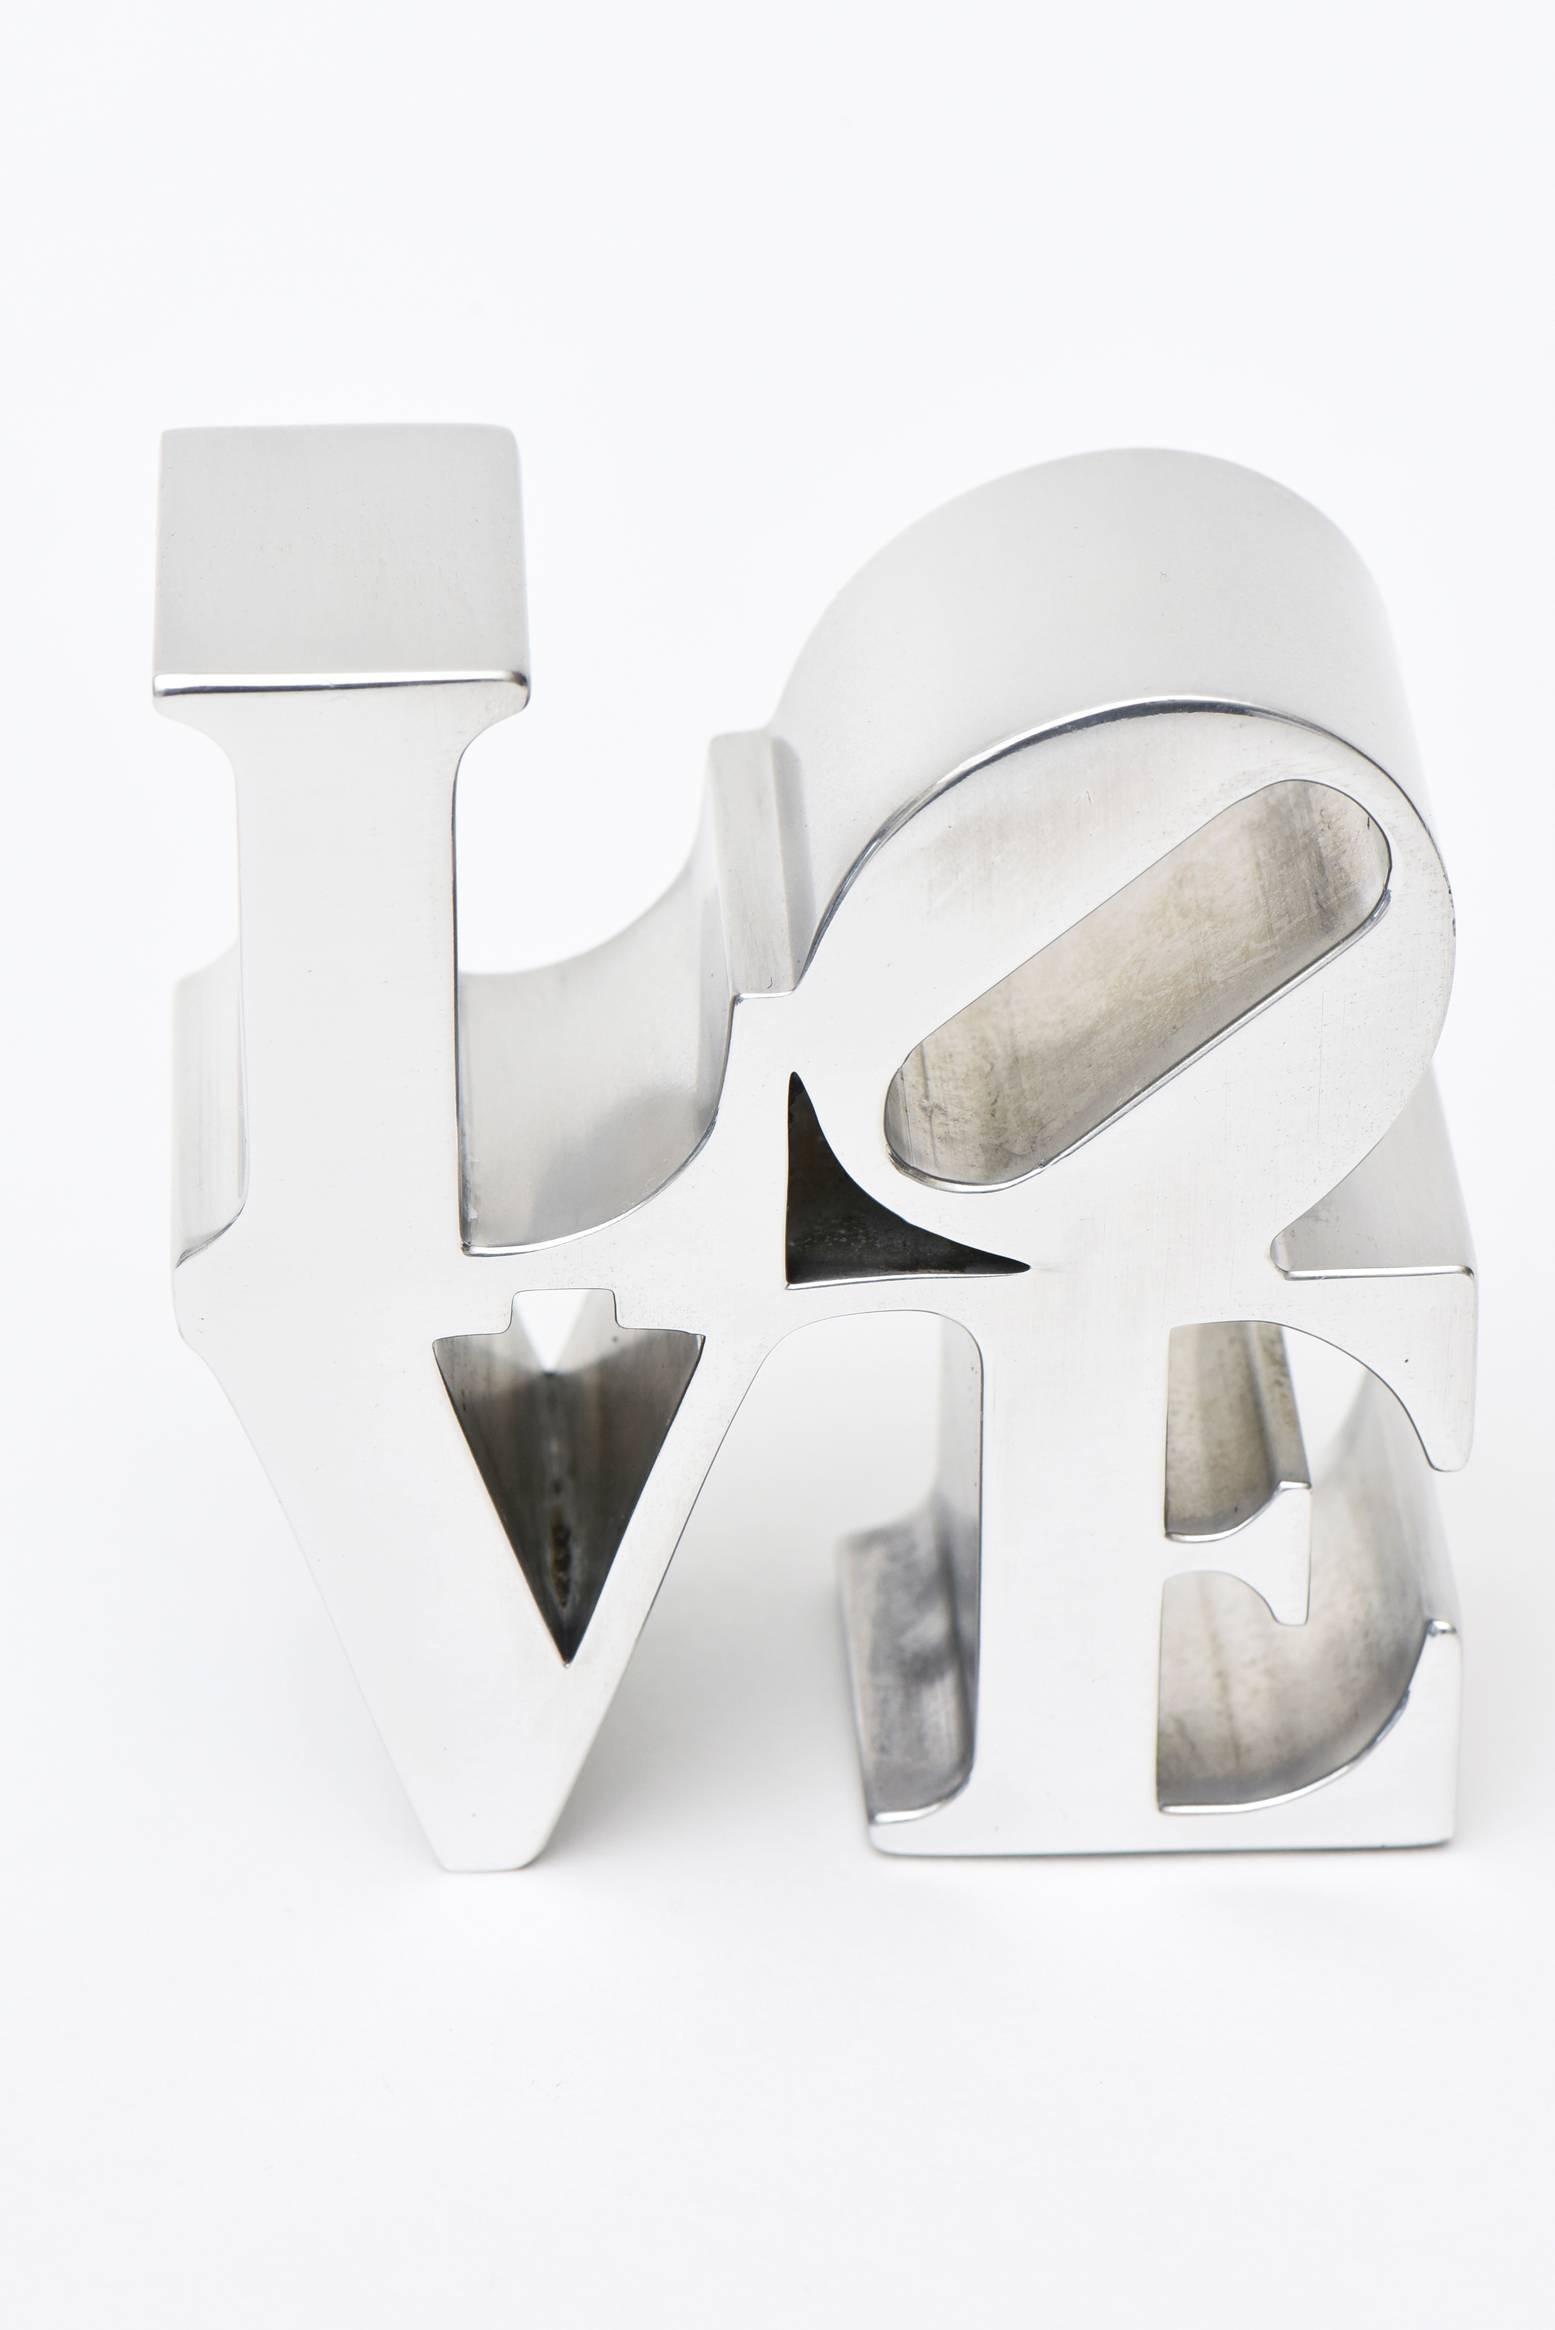 This original paperweight love sculpture that was done in the 1970s by Robert Indiana was sold at that time at MOMA. It is polished aluminium.

It was a small rendition of Robert Indiana's original love painting that put him on the map
as a